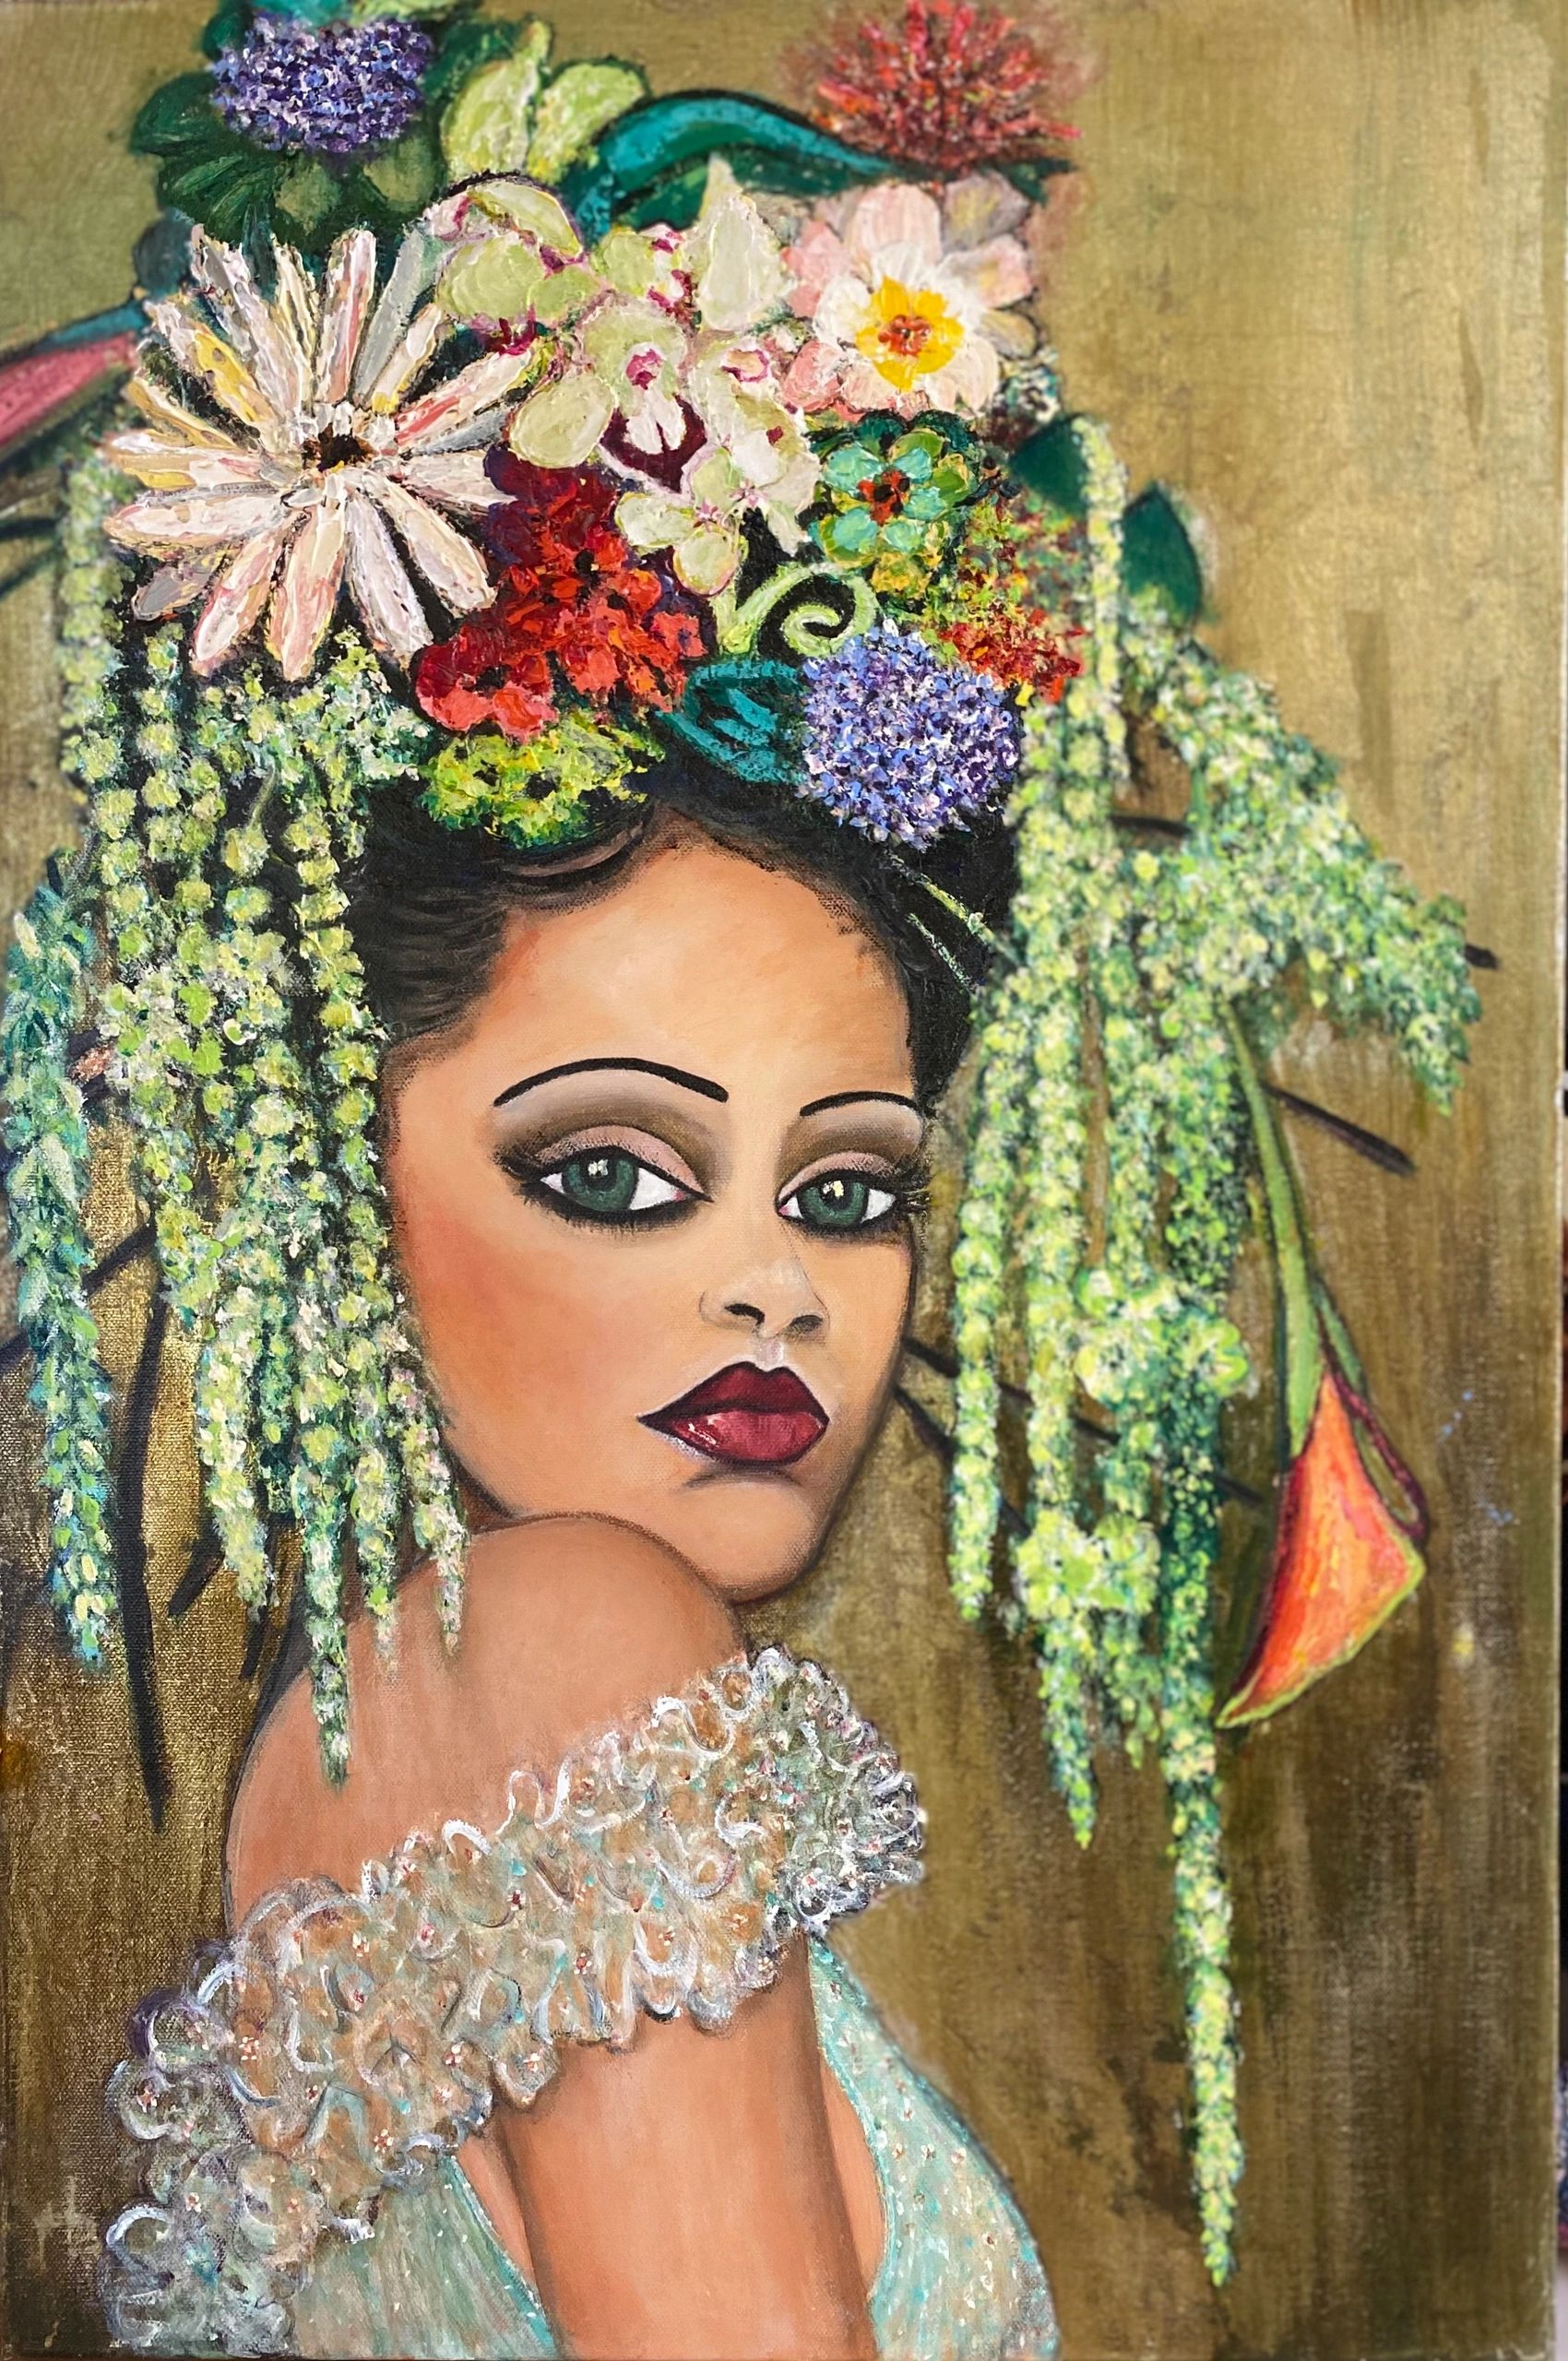 PAINTING OF  A FEMALE SINGER CALLED RIHANNA WITH TEXTURED FLOWERS IN HER HAIR.